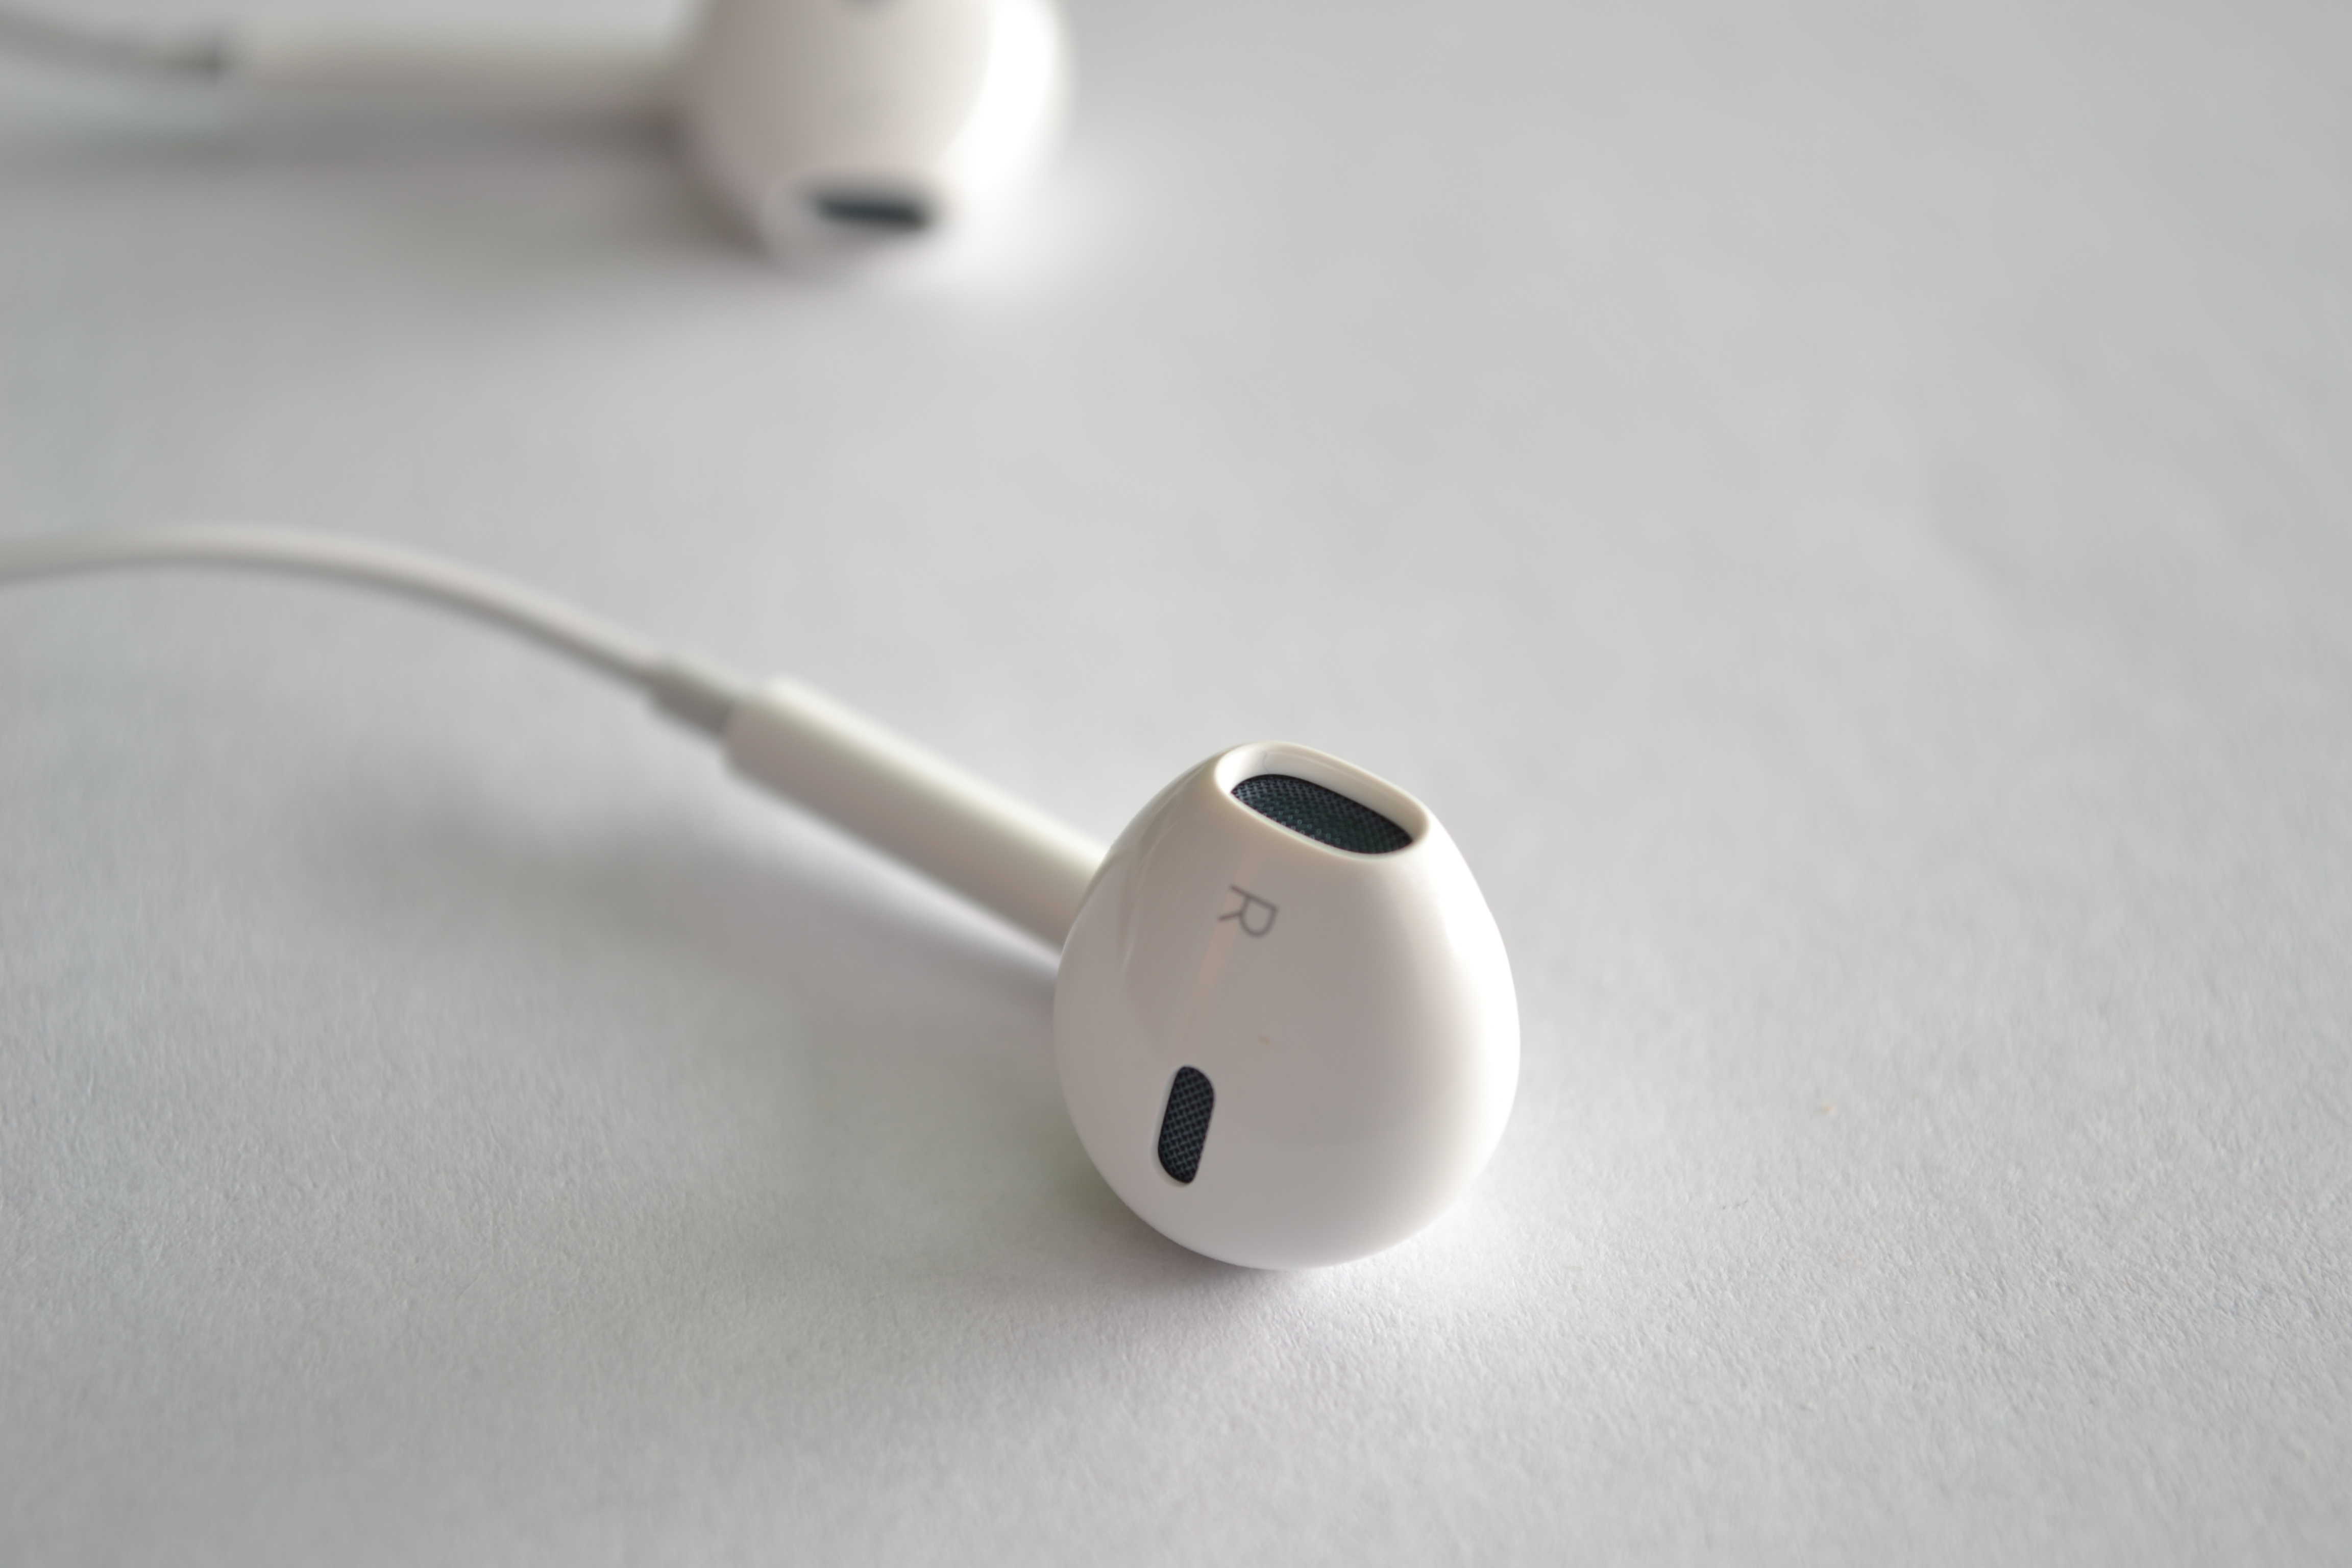 The iPhone 5 launch brought Apple's new EarPods, with big improvements over previous versions.